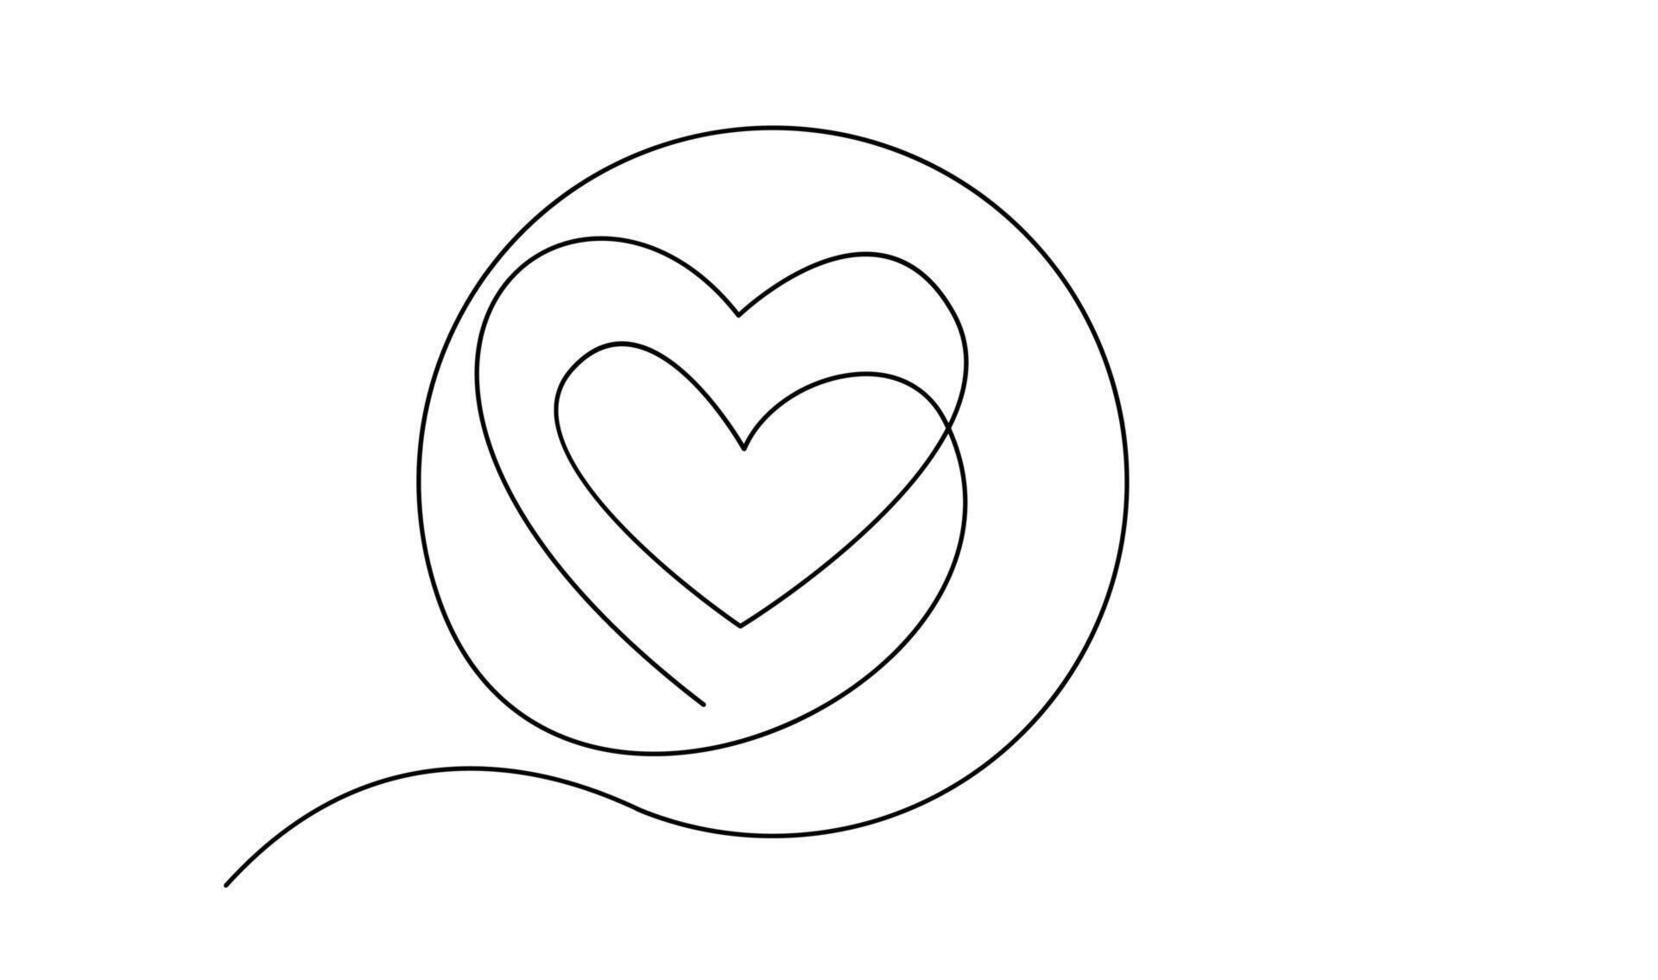 Hearth love continuous line hand writing illustration vector